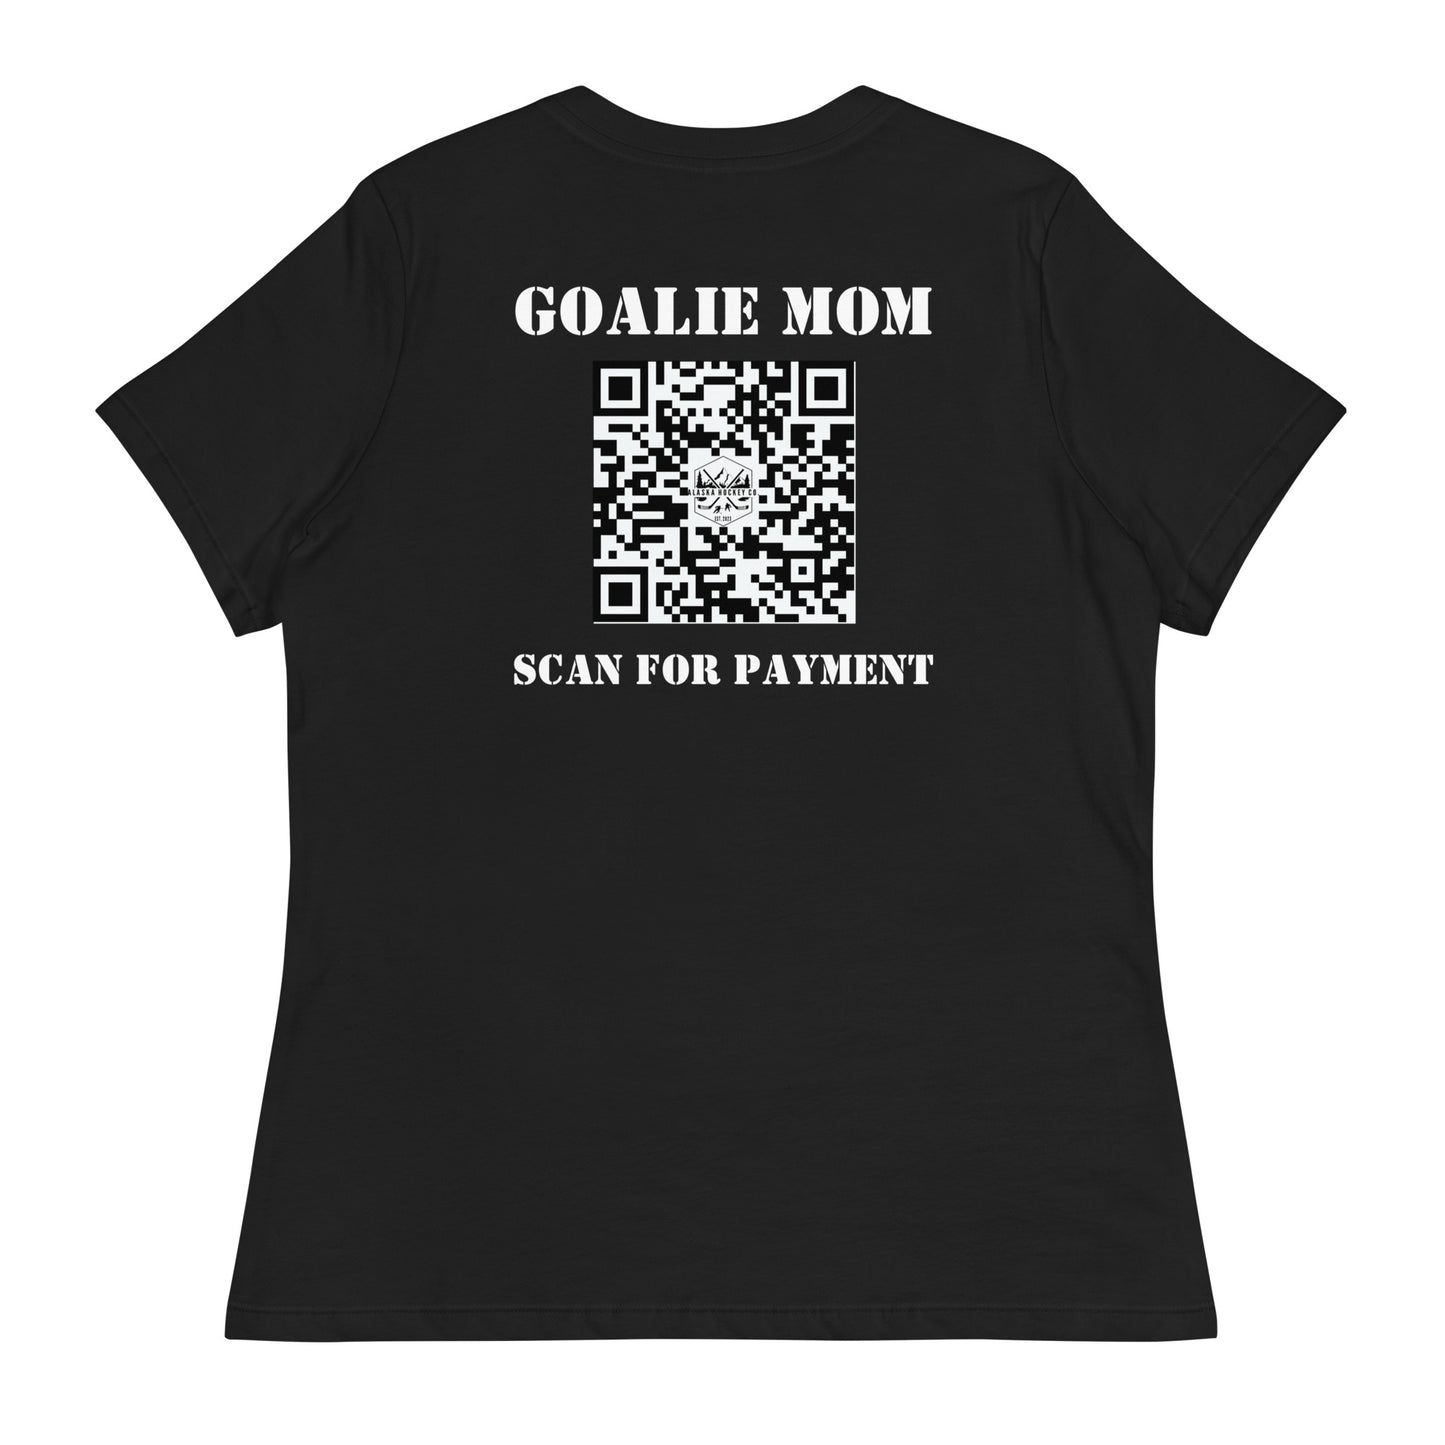 Goalie Mom Scan for Payment T-Shirt